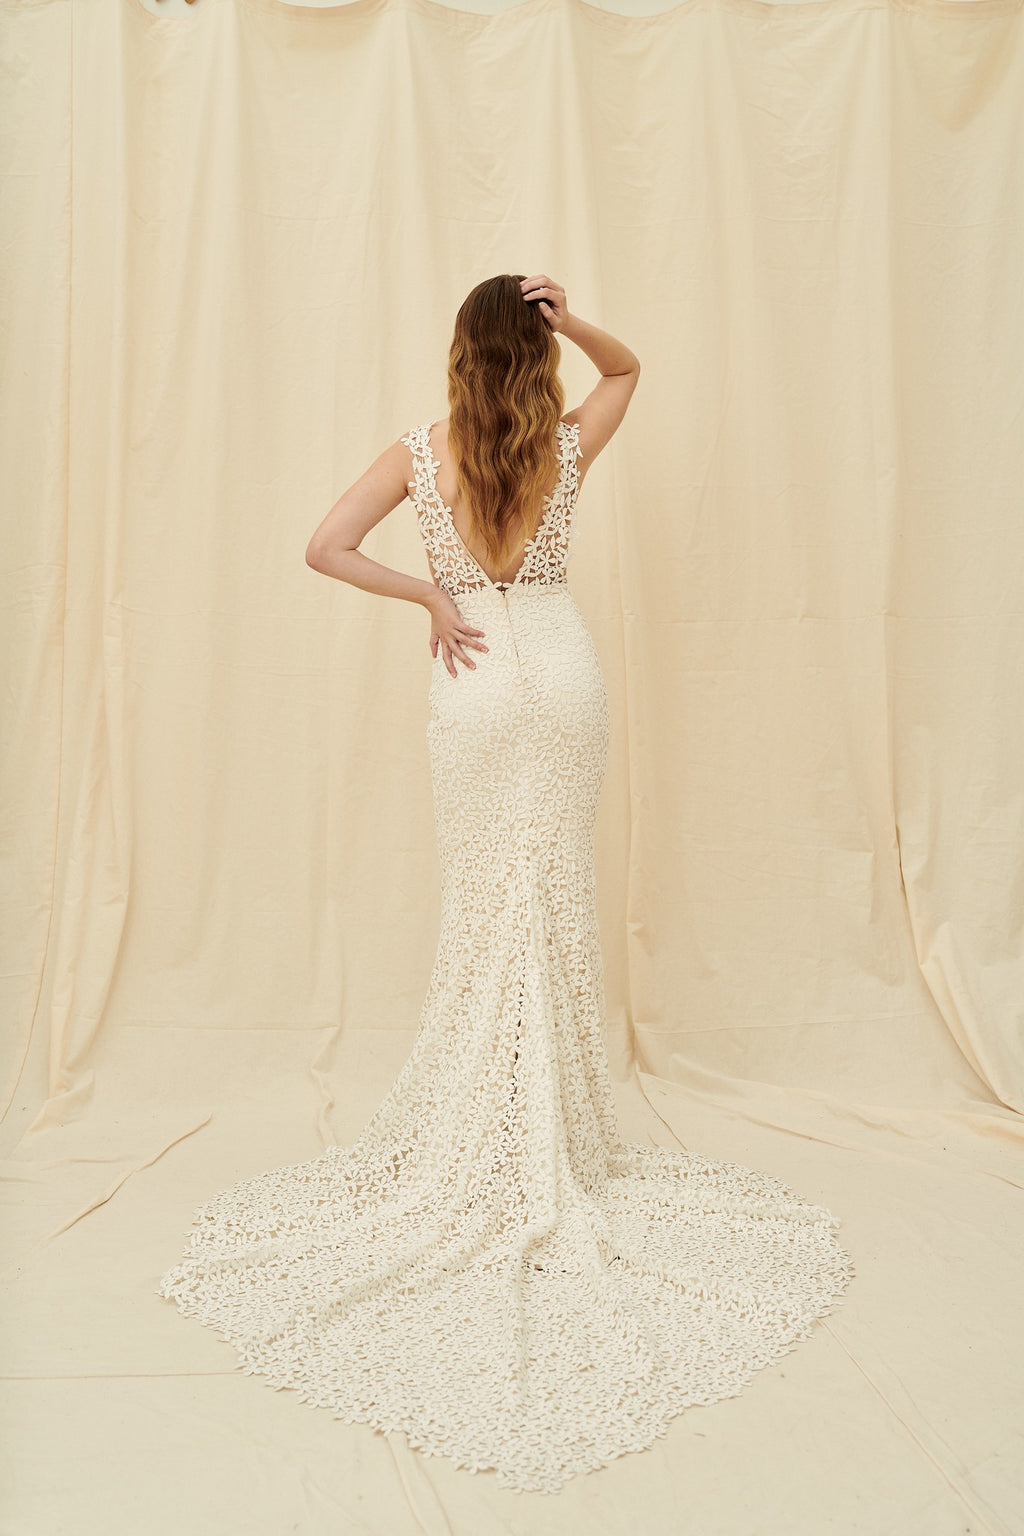 Mermaid wedding dress with all-over tiny flower lace, a dramatic train, and a low back